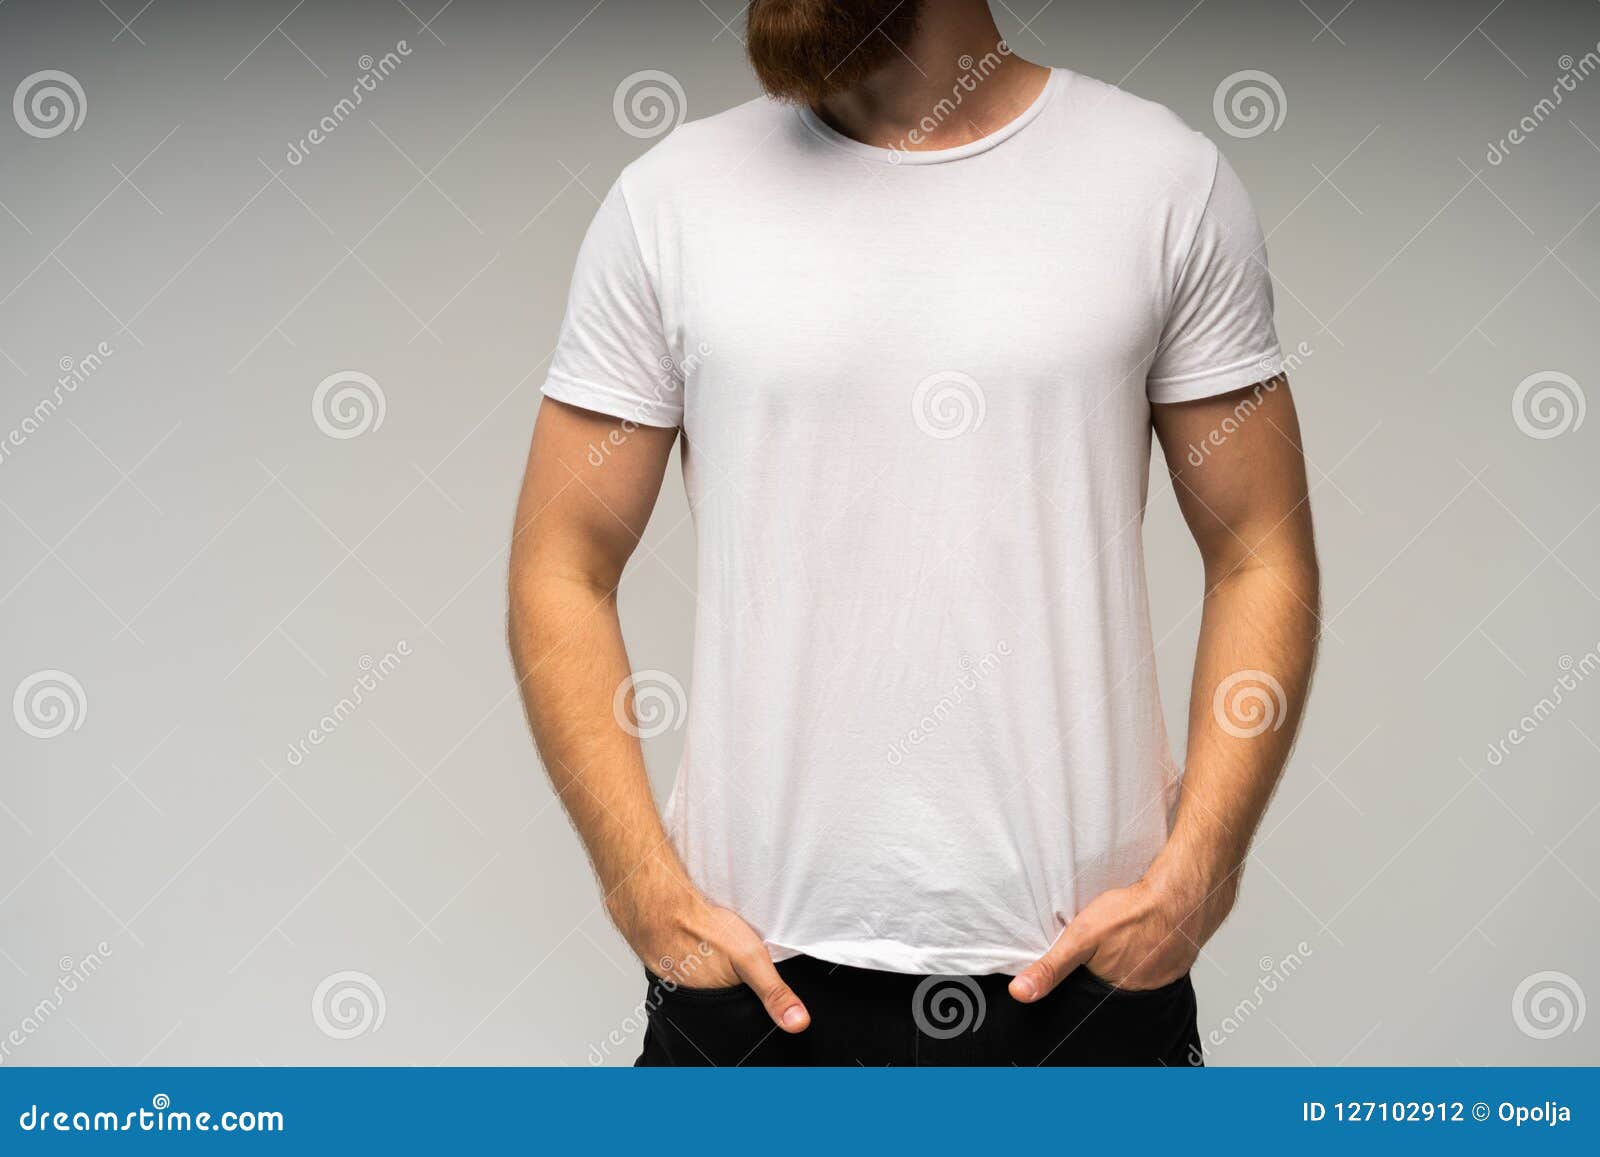 Young Man Wearing Blank White T-shirt Isolated on White Background ...